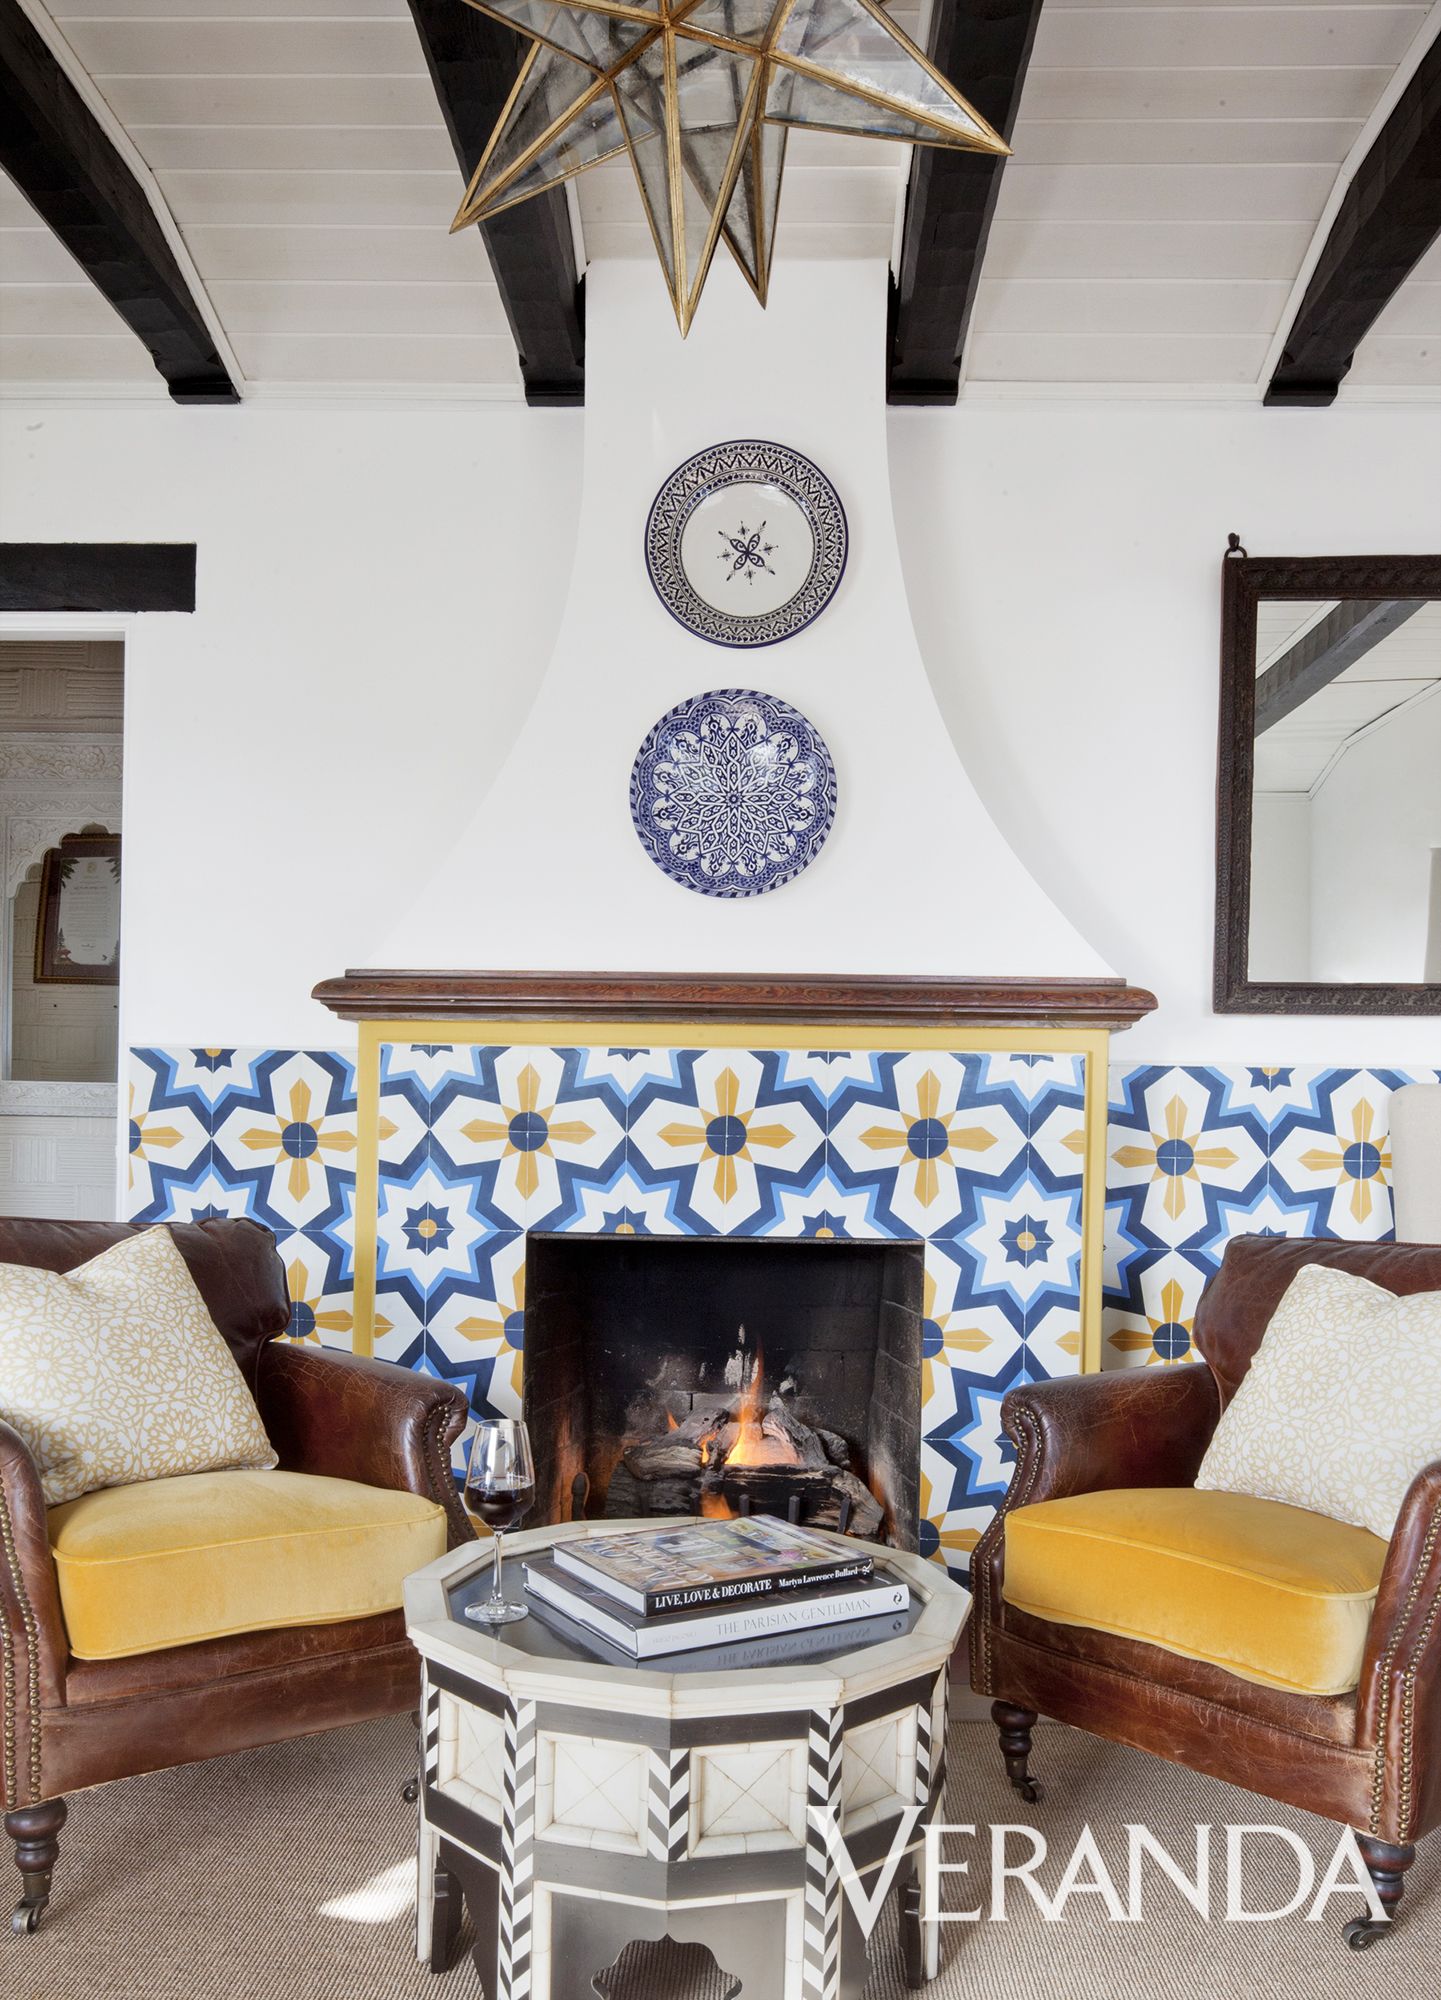 These 25 fireplace ideas from our archives will inspire a space you